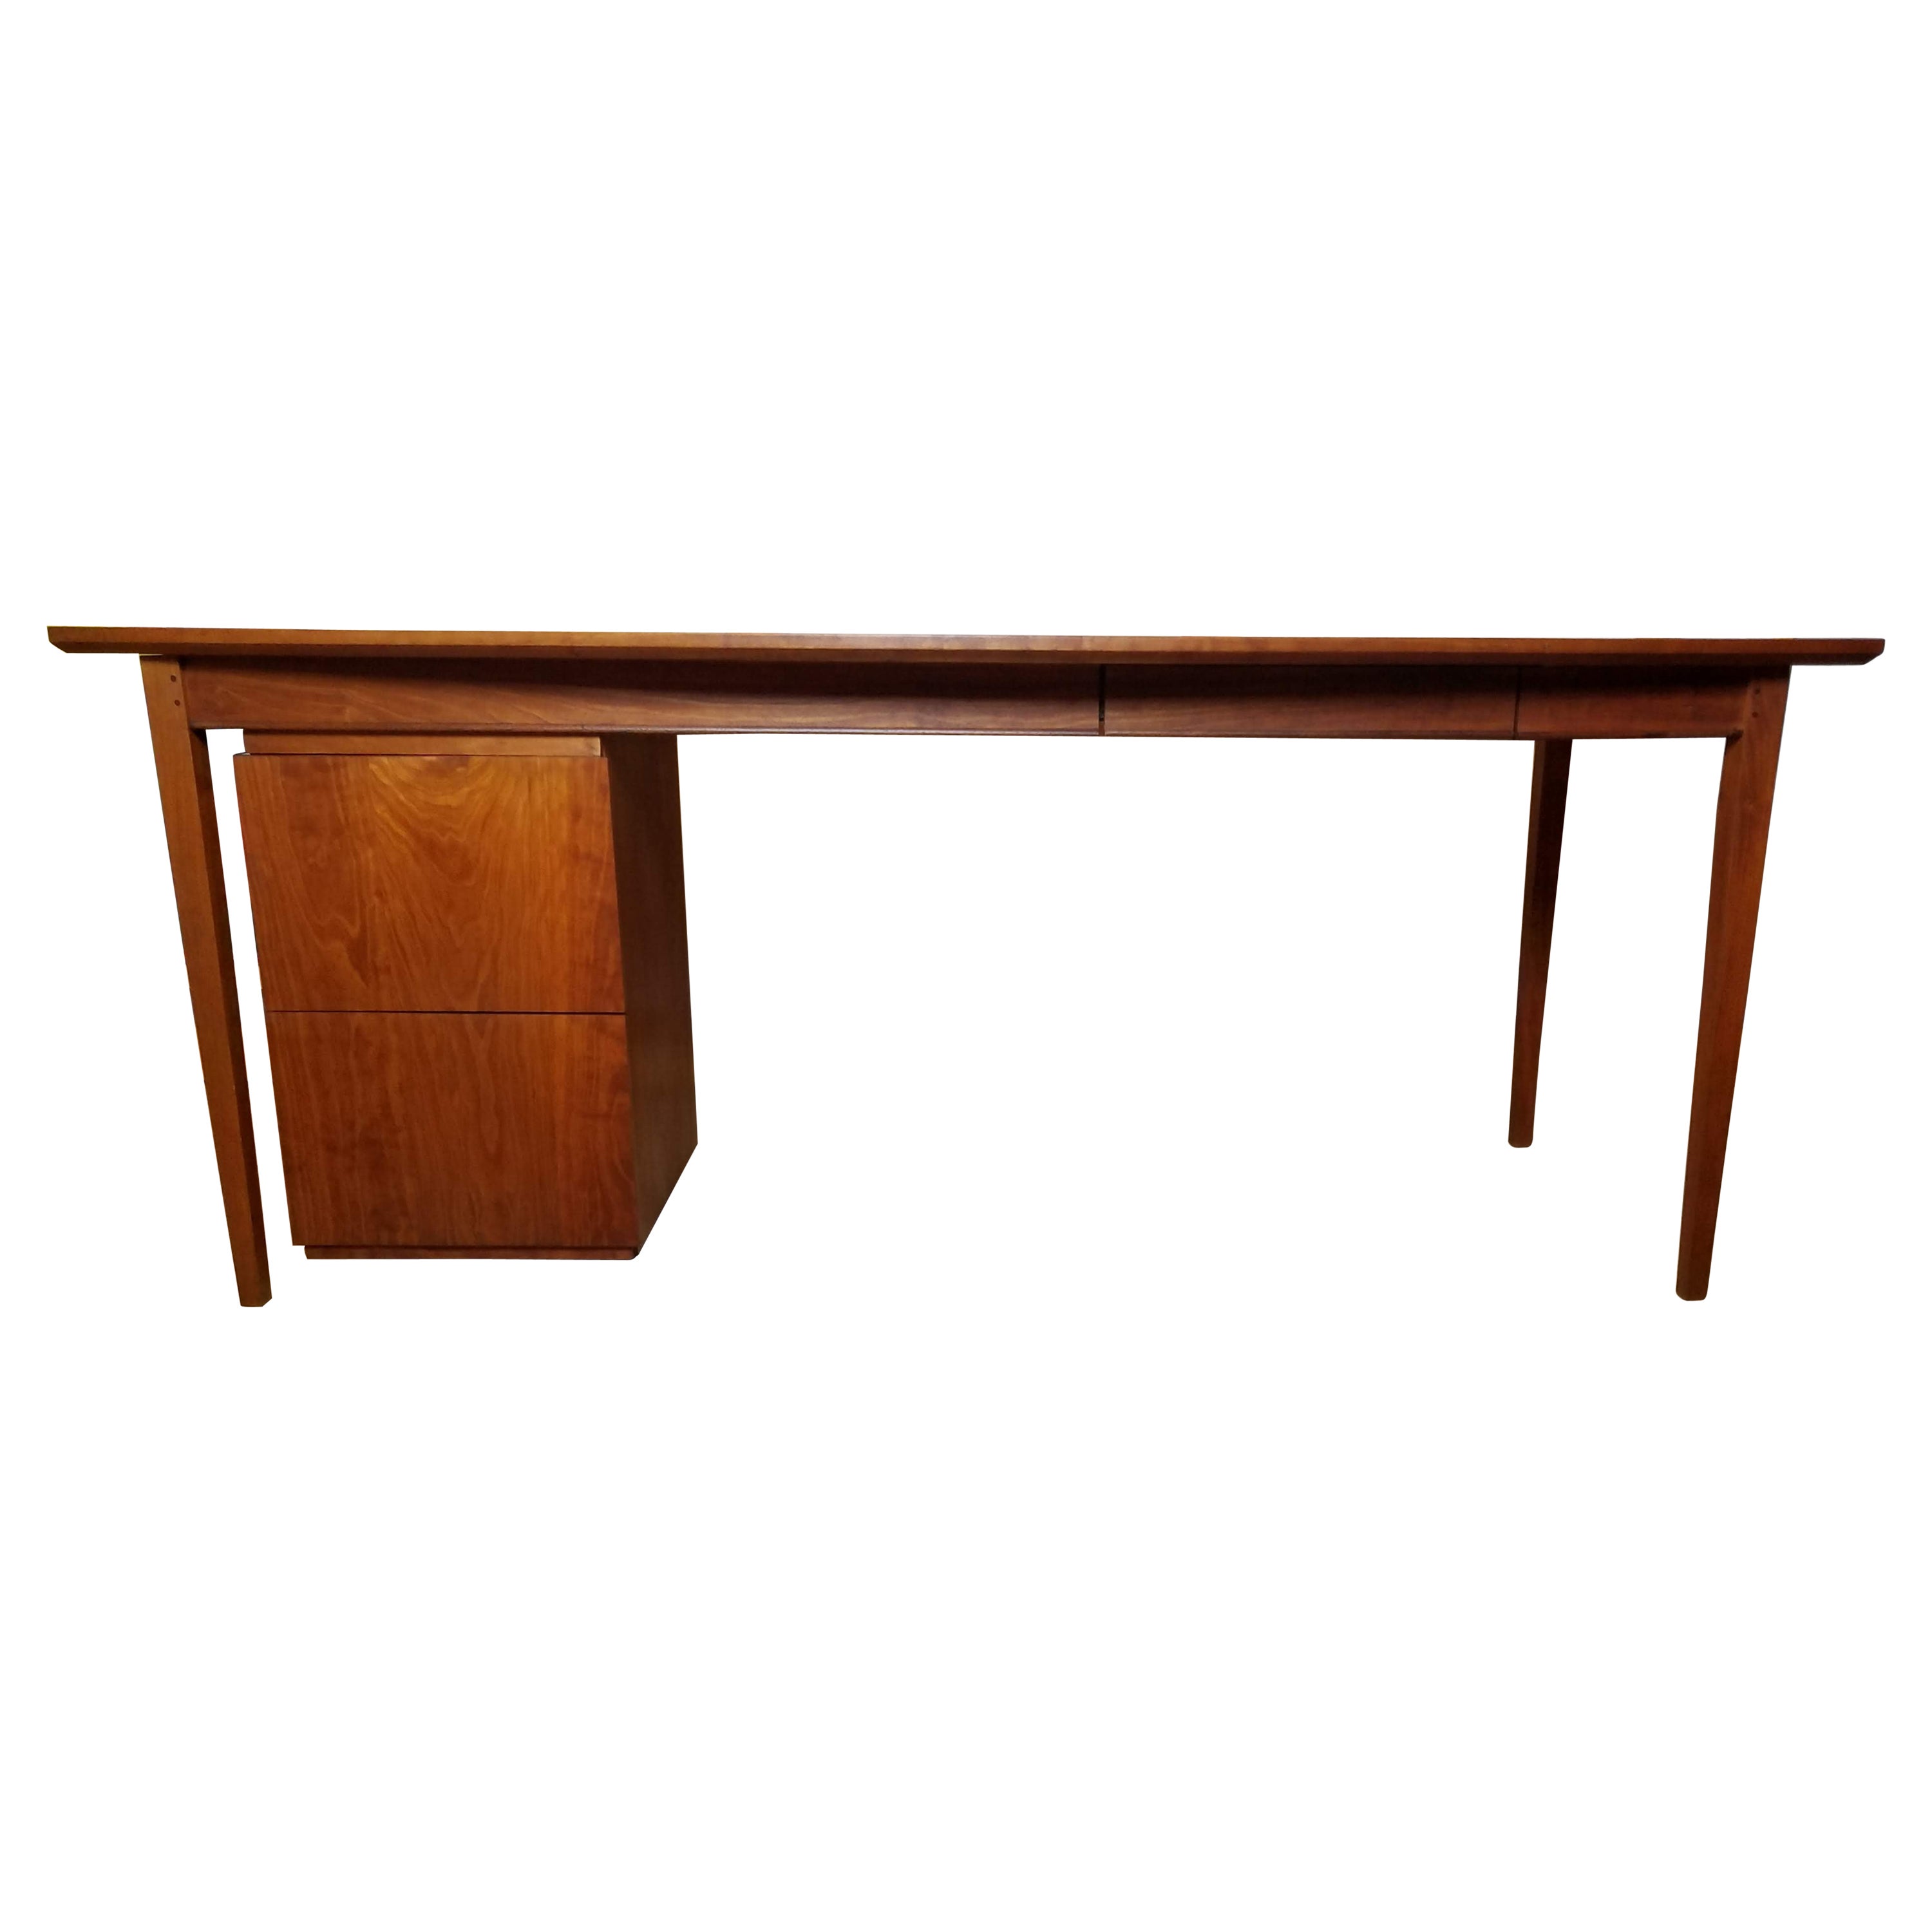 Bowed Front Solid Cherry Desk with Suspended Drawers Maine Studio 1980s For Sale